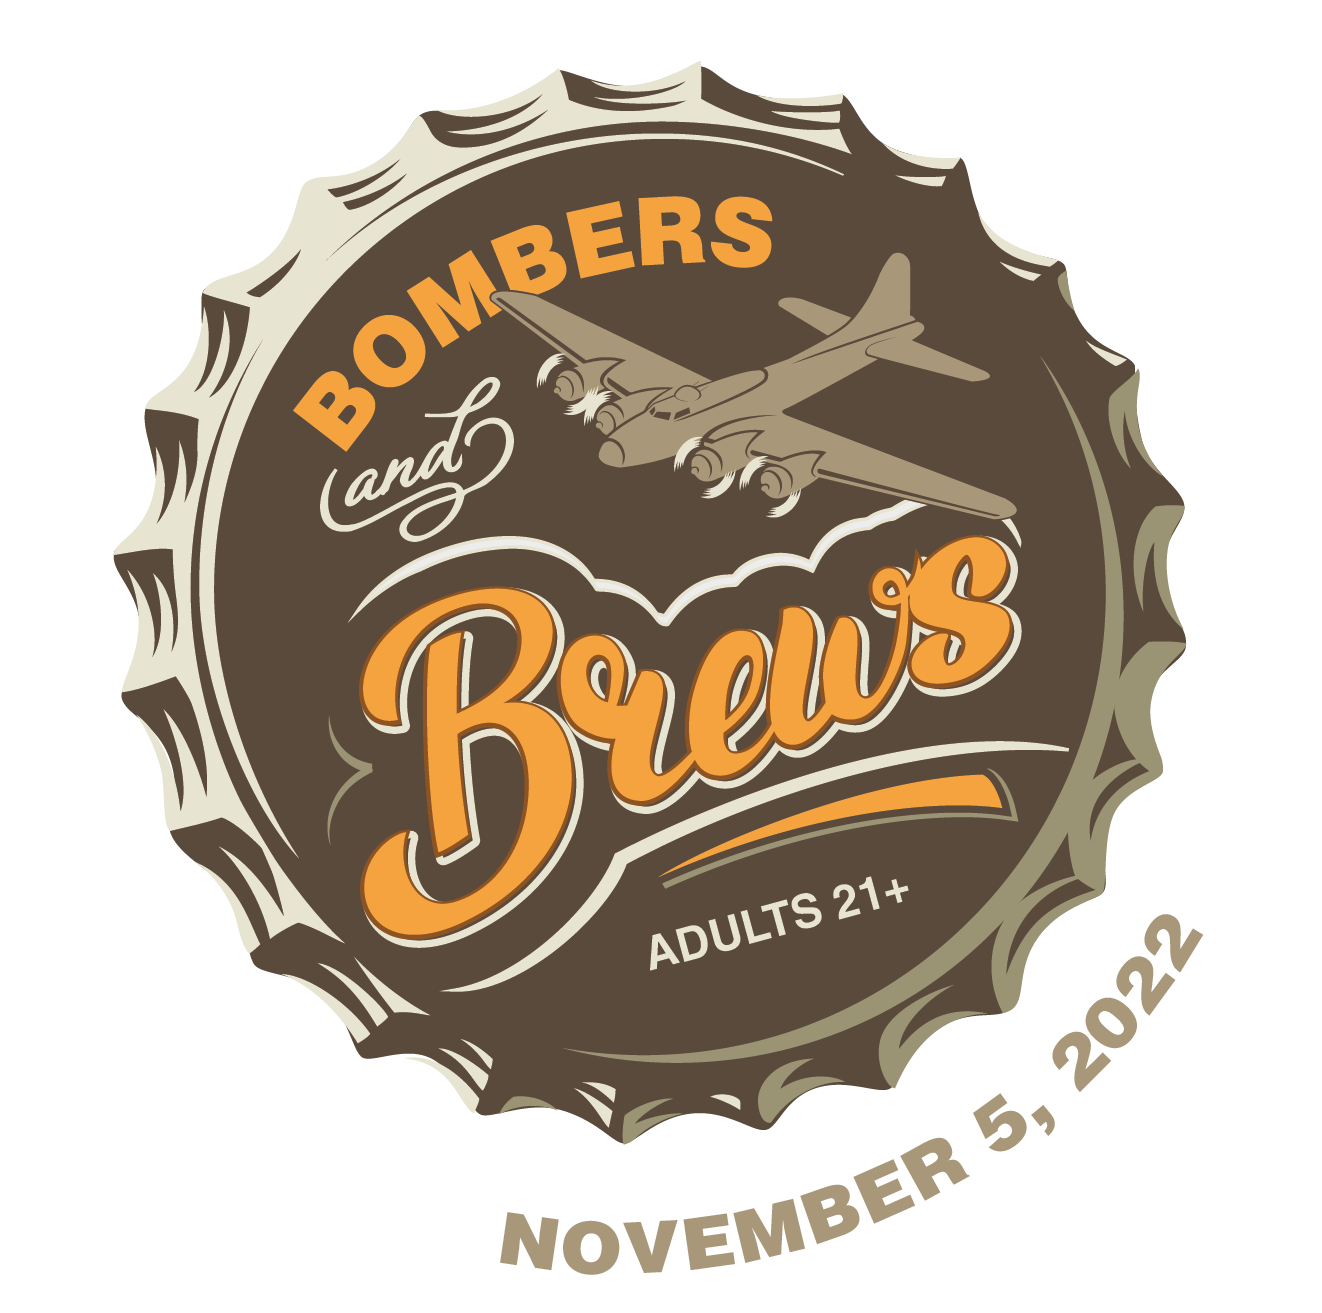 Image of a bottle cap with the text "Bombers and Brews, Nov. 5, 2022" on it